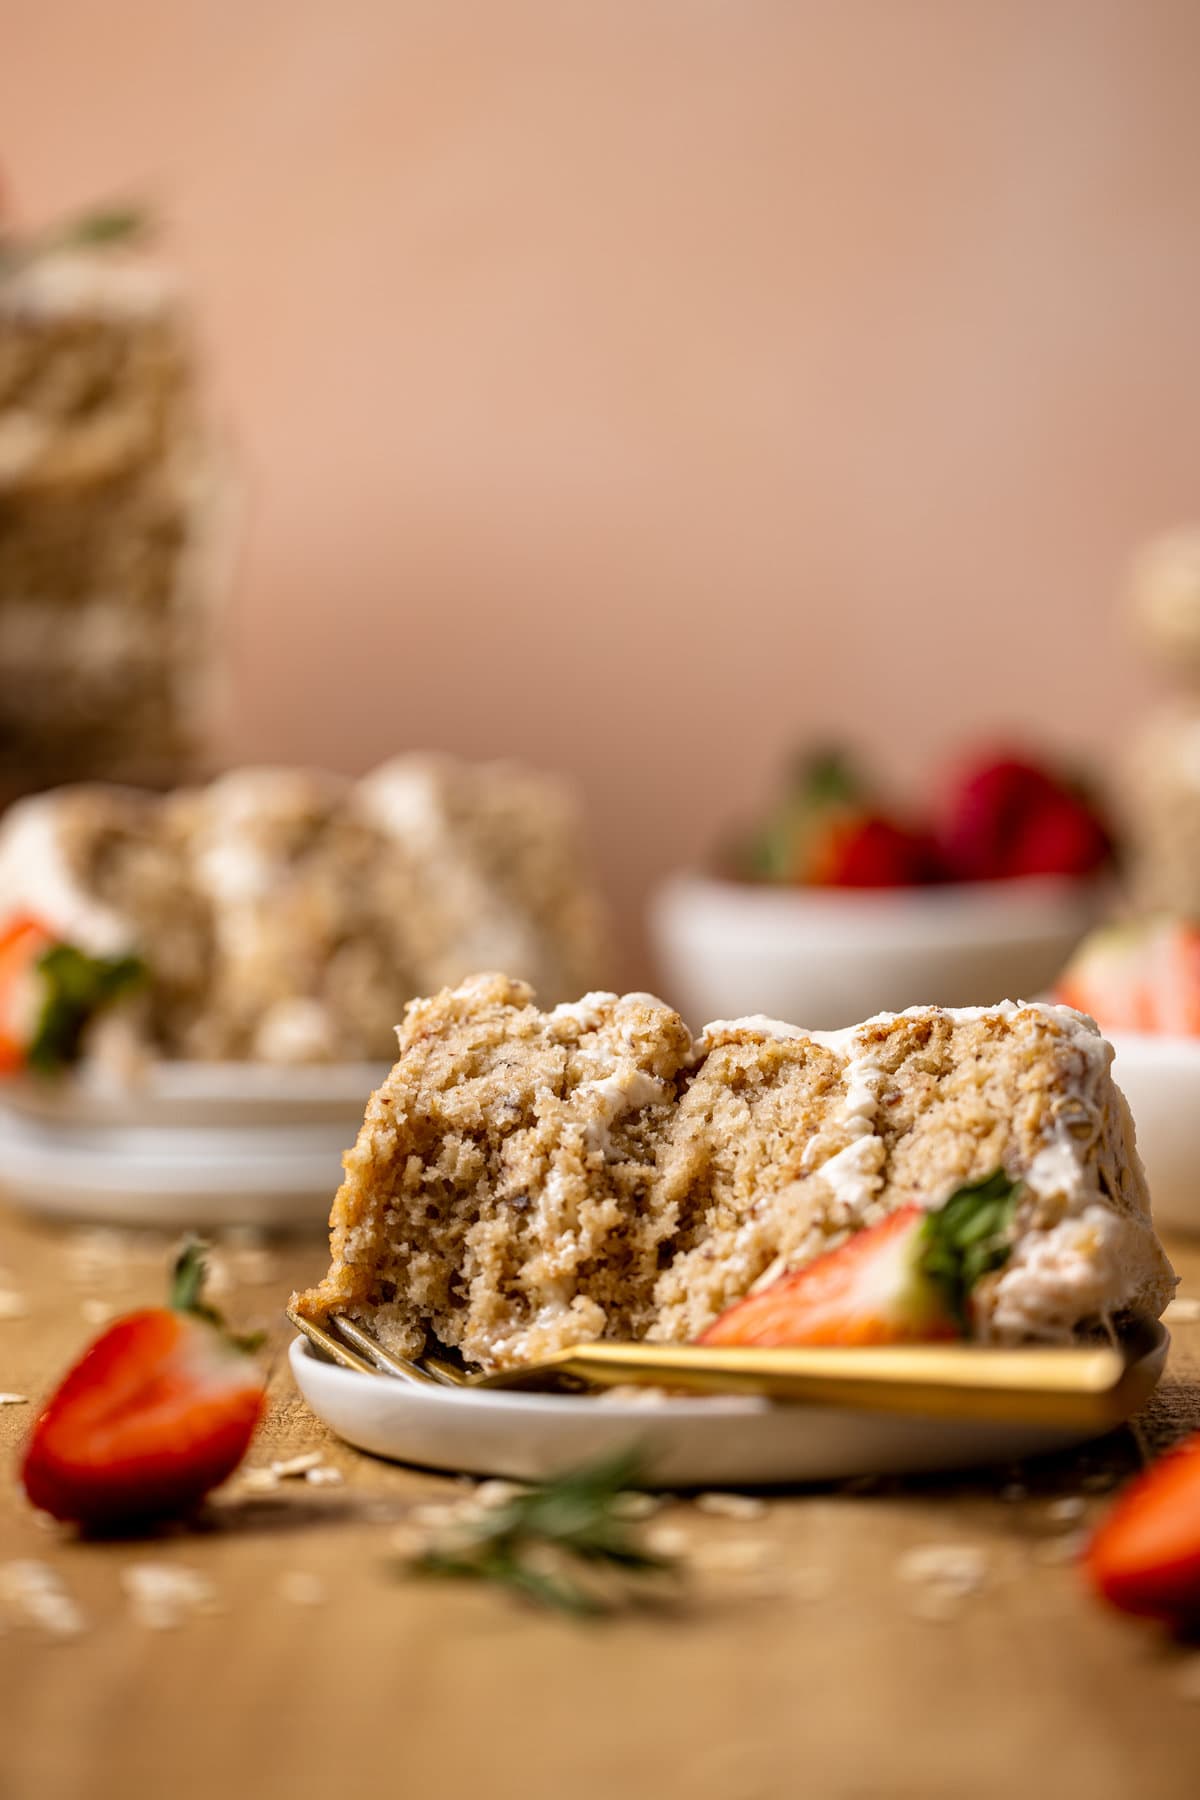 Slice of Vegan Strawberry Oatmeal Cake with a fork